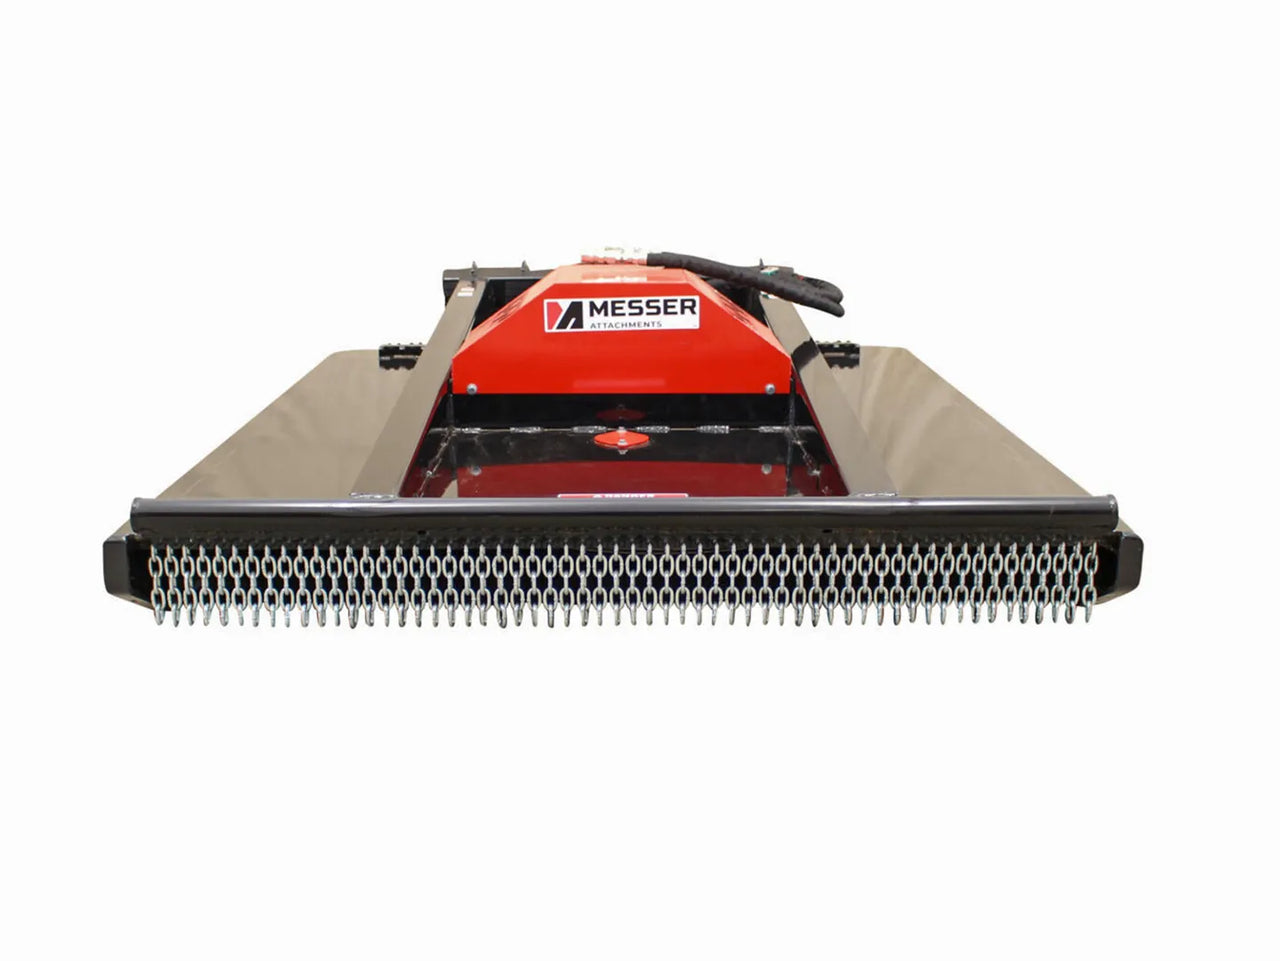 72" brush cutter with a robust design featuring a red and black color scheme, manufactured by Messer Attachments. The cutter has a protective front chain guard and is designed for heavy-duty land clearing and brush cutting.